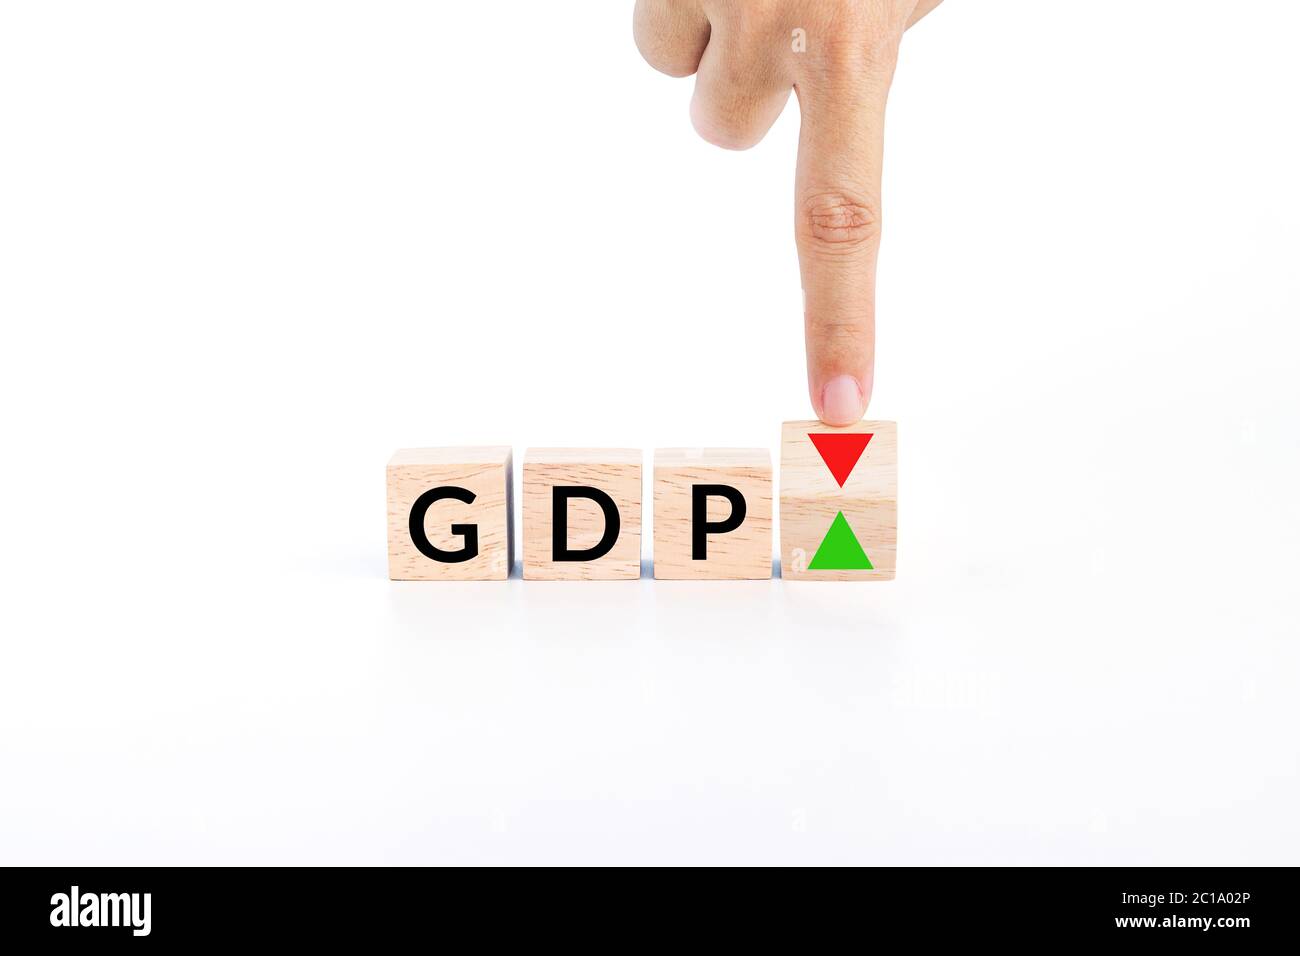 hand flip wooden cube to changes the direction of an arrow symbolizing that the GDP (gross domestic product) of a country is changing the trend Stock Photo